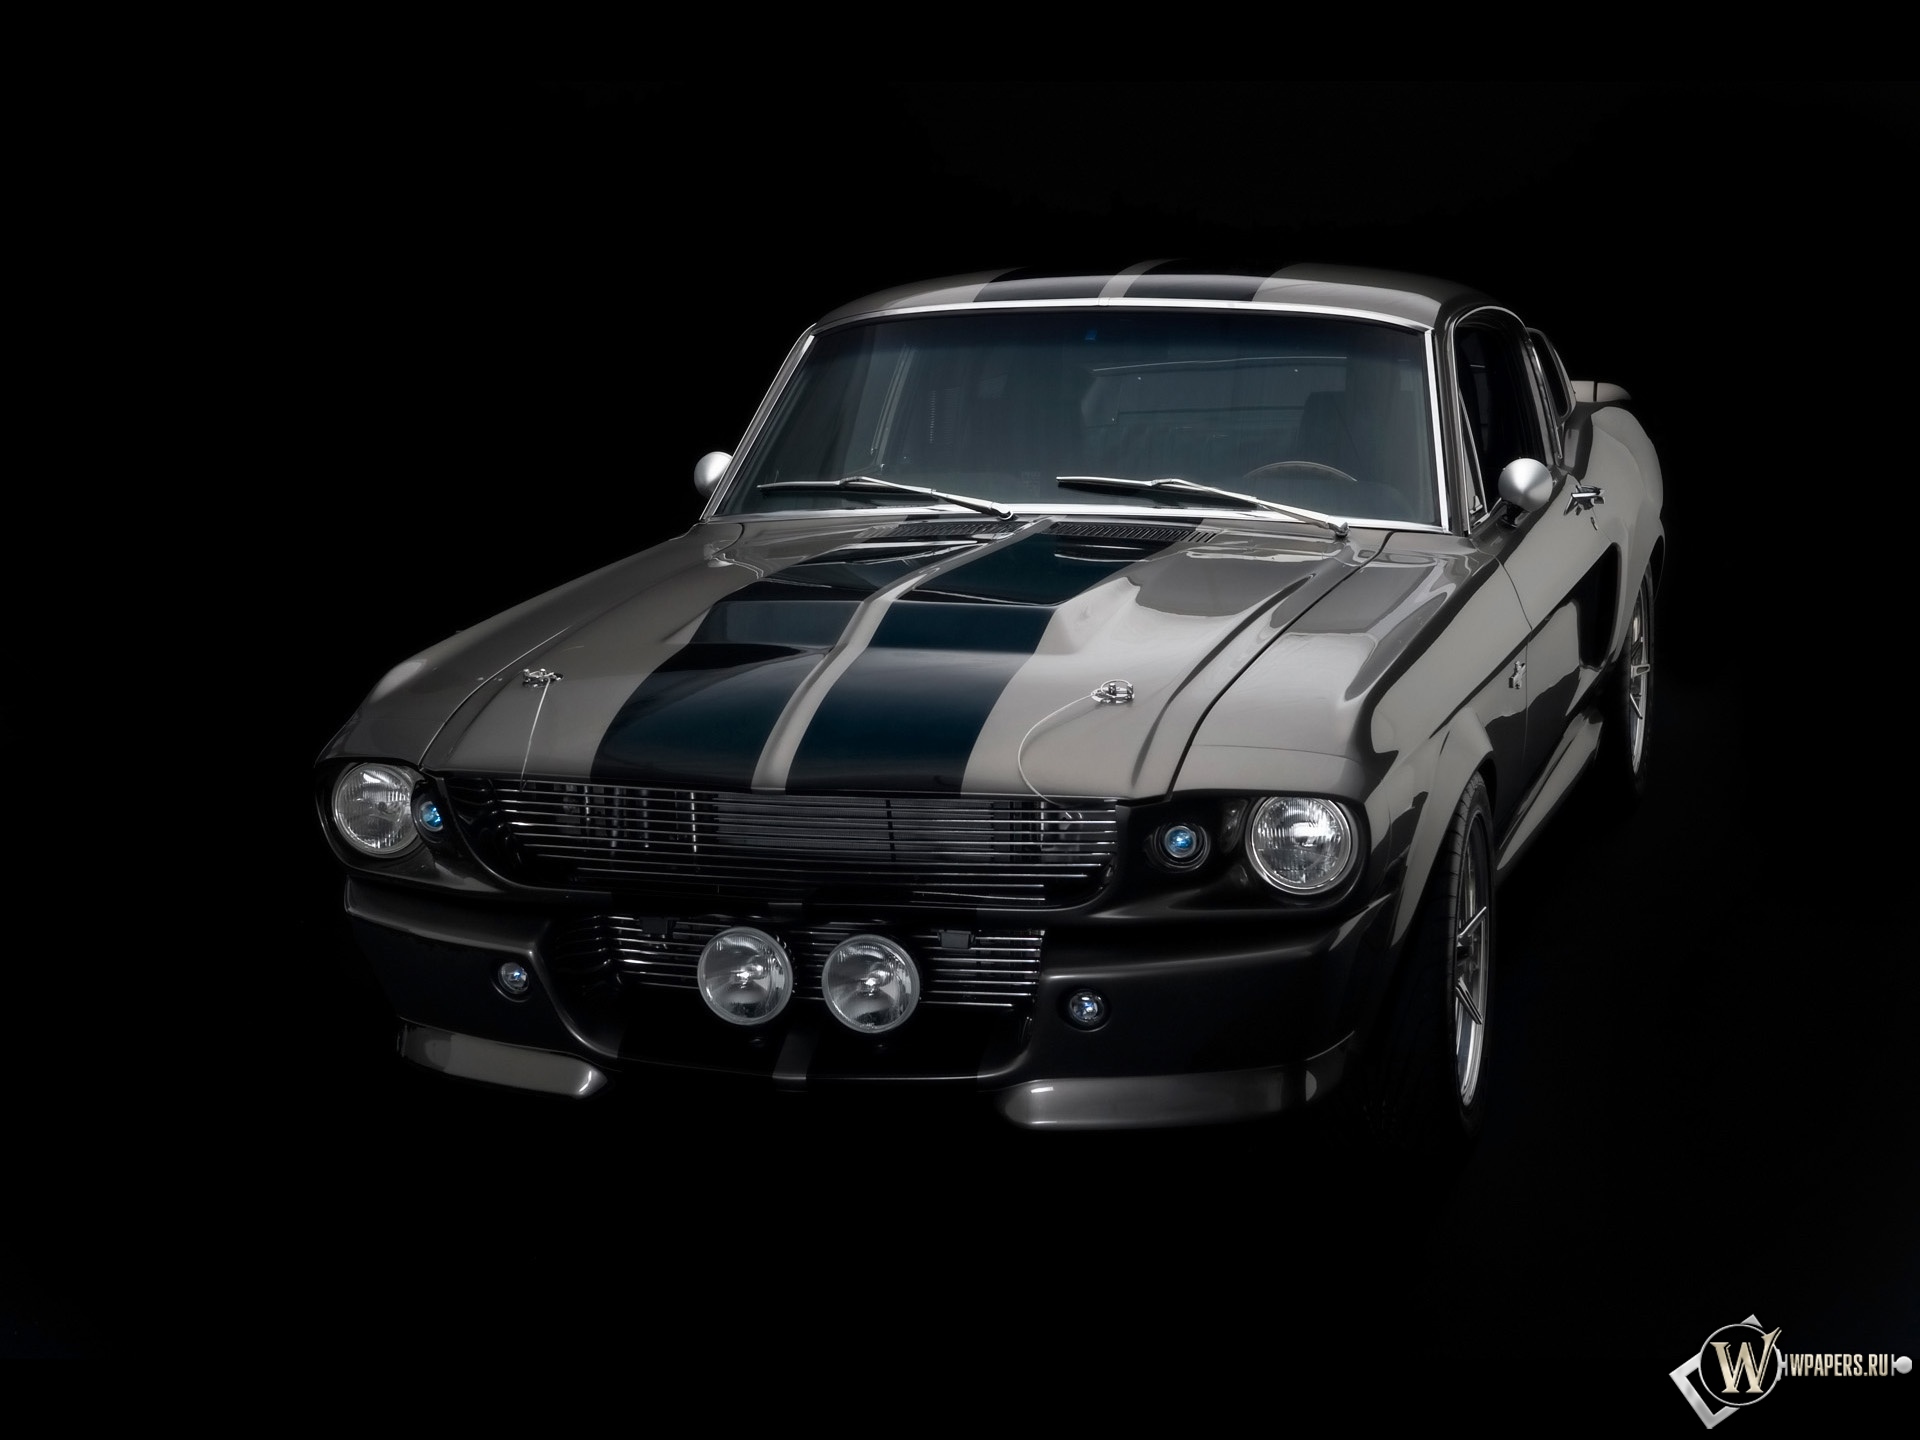 1967-Mustang-Fastback-Gone-in-60-Seconds-Eleanor-Section 1920x1440